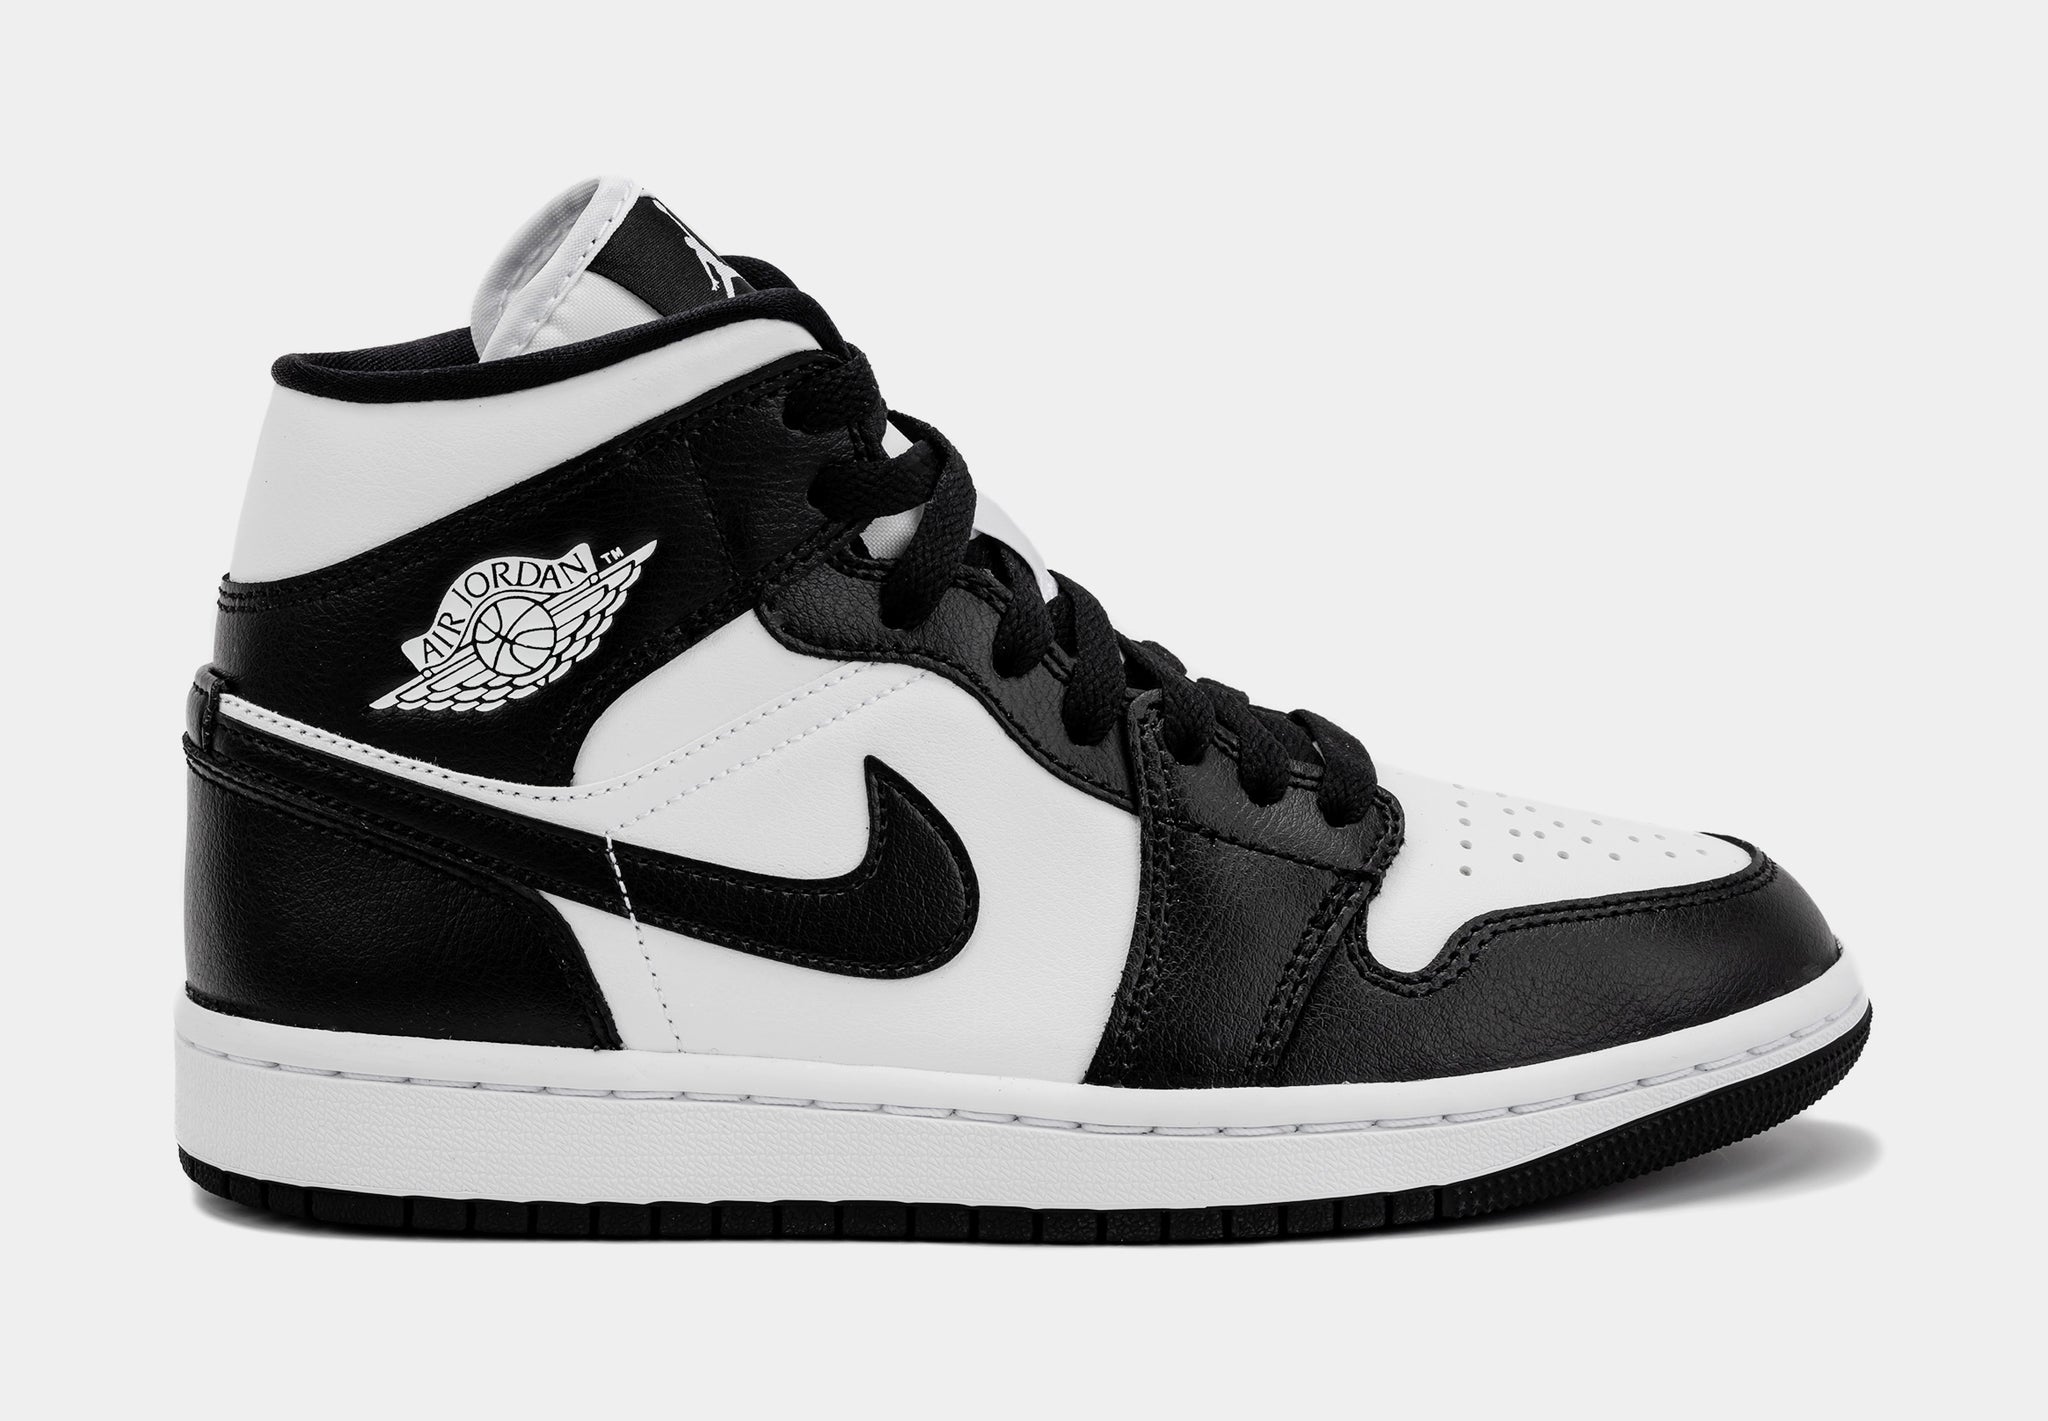 Sneaker Freaker on X: Here's how to style the Air Jordan 1